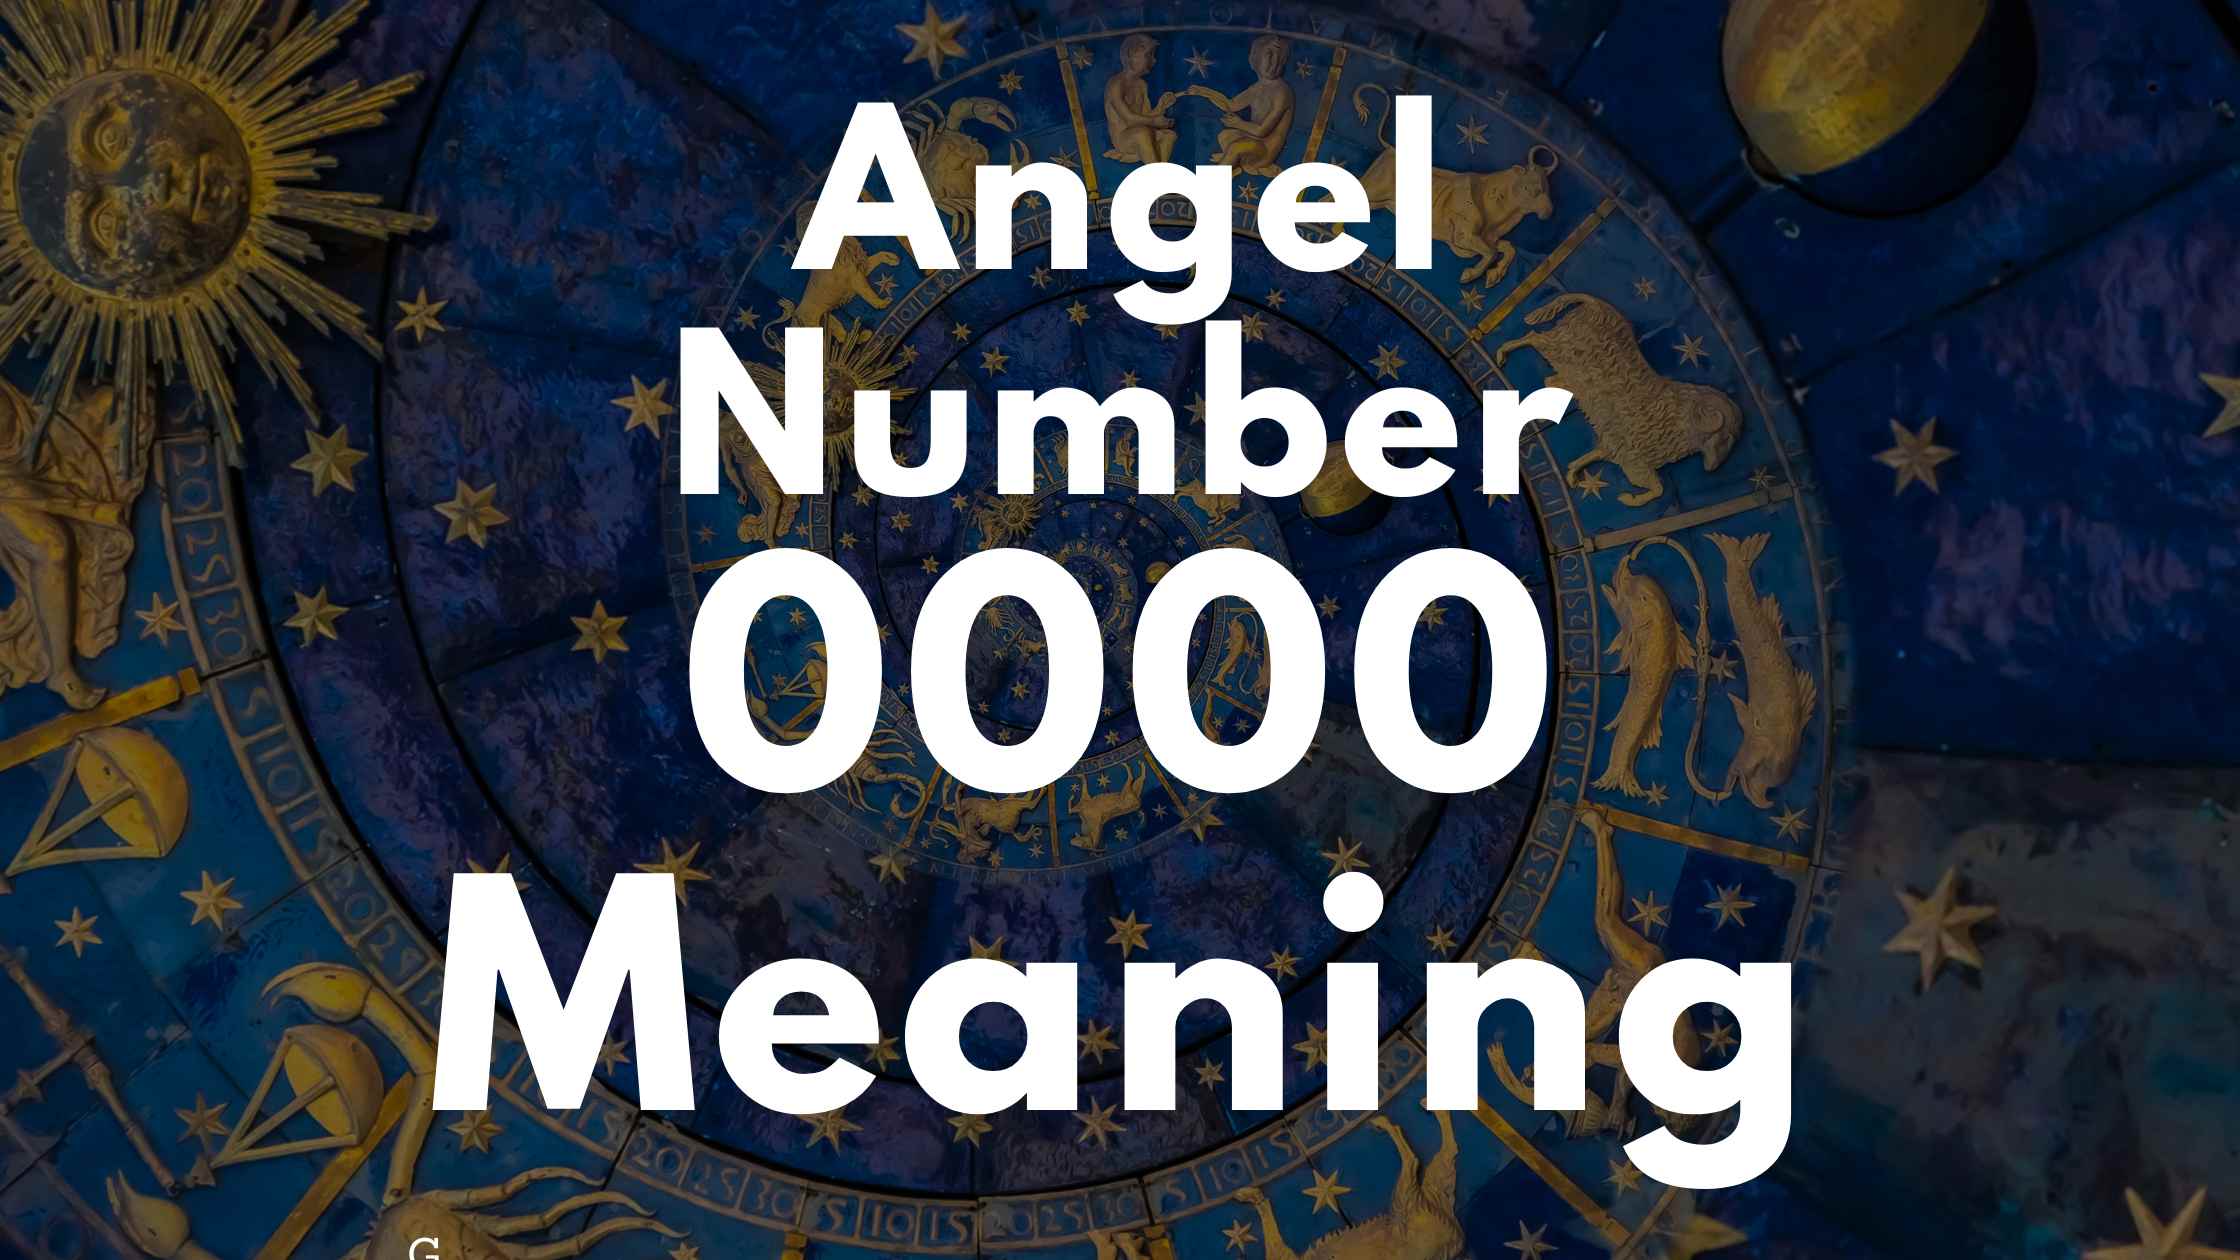 Angel Number 0000 Spiritual Meaning, Symbolism, and Significance